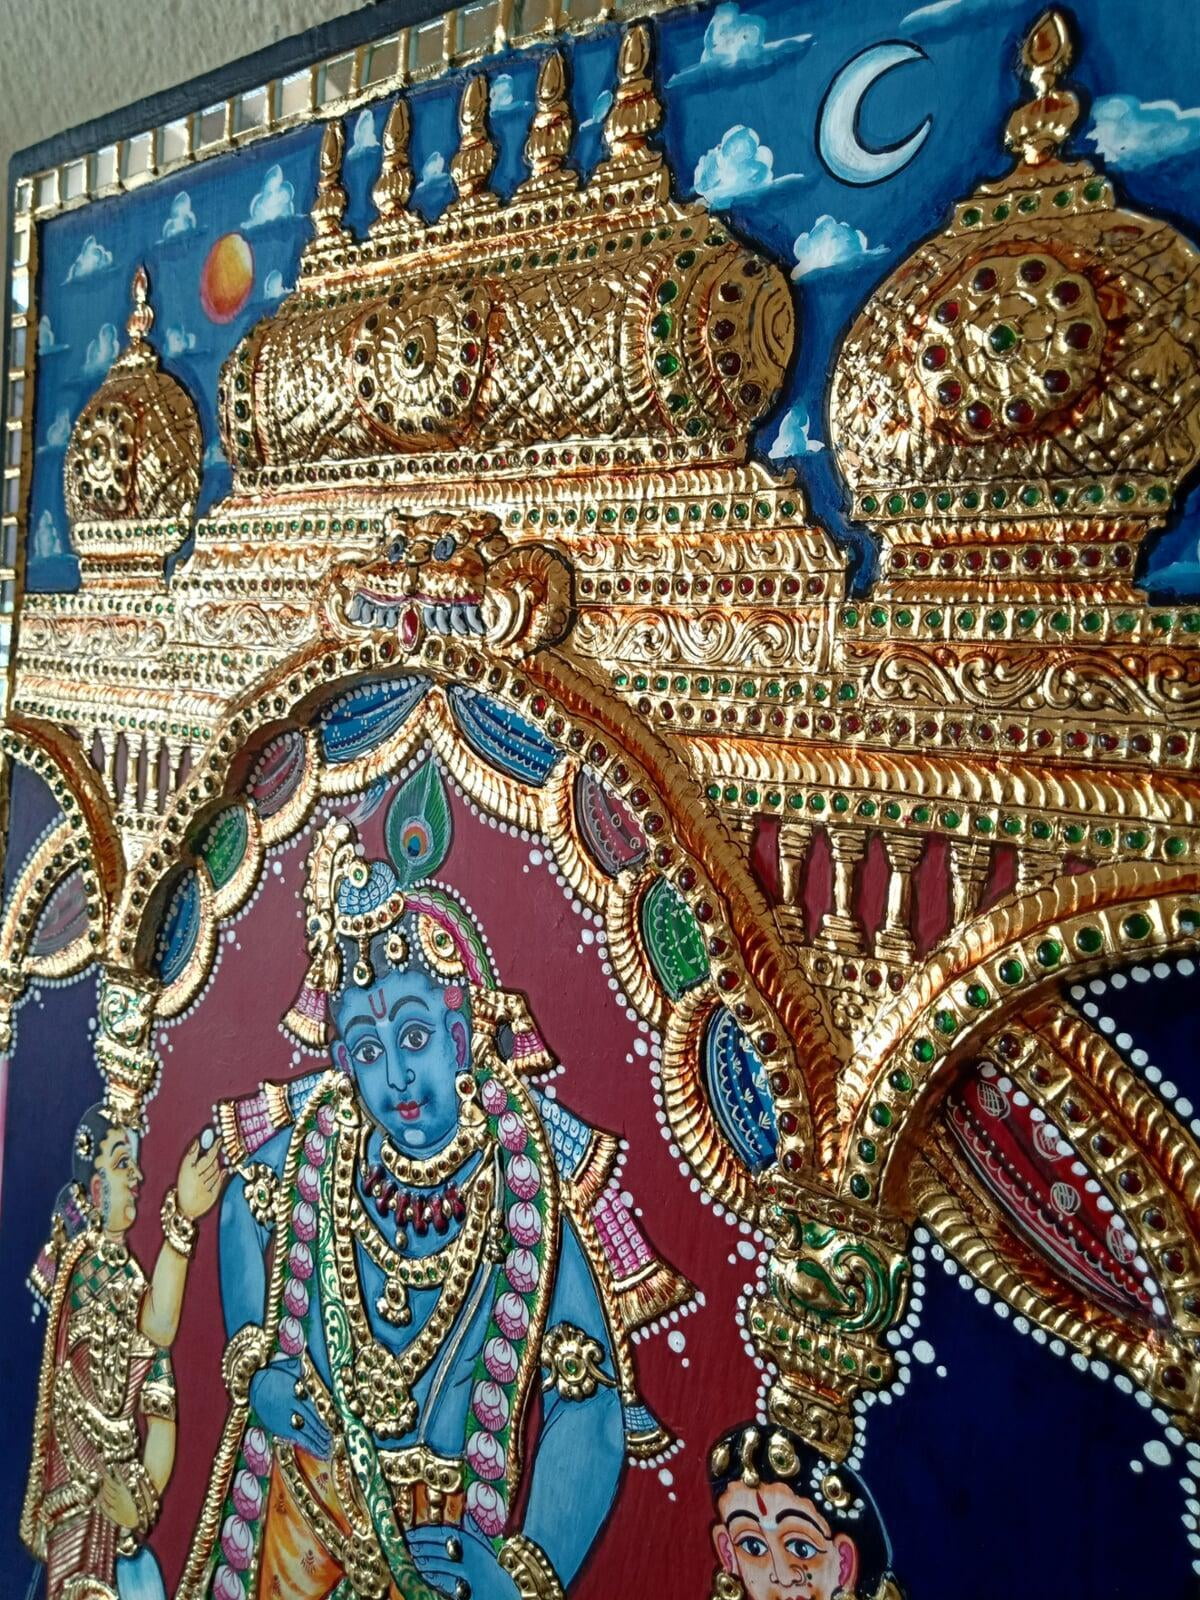 A fully completed Tanjore Painting